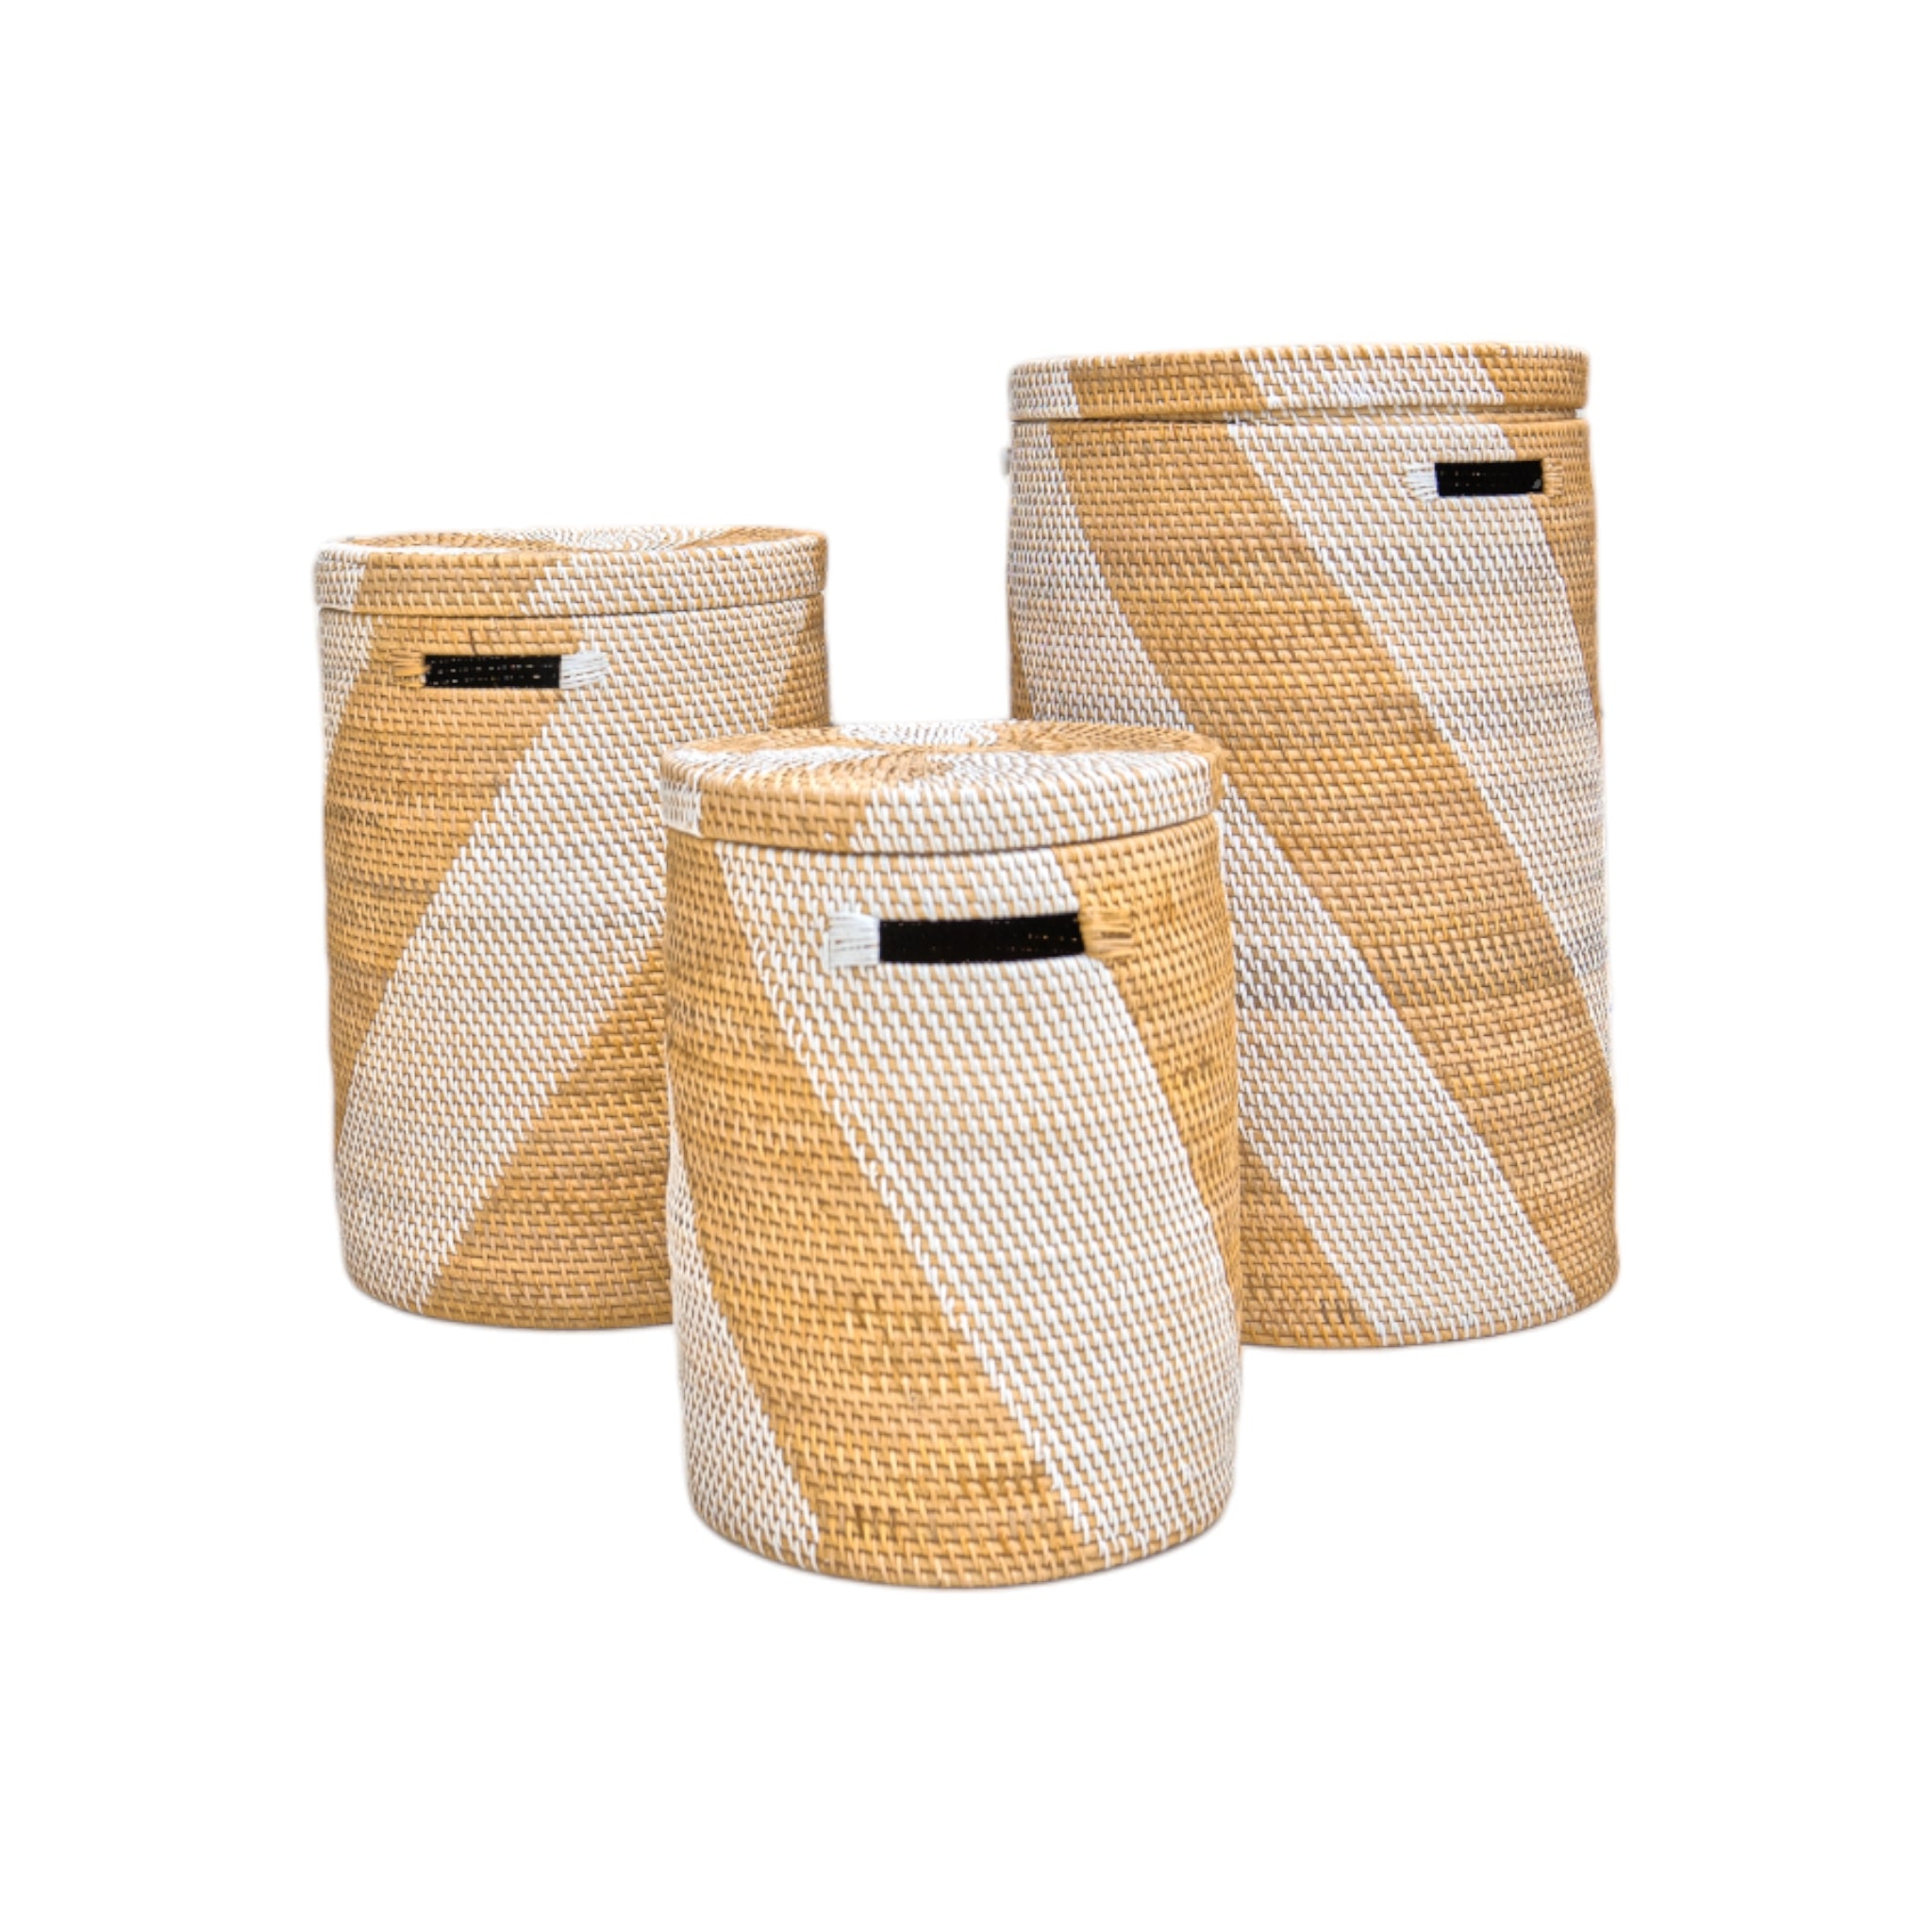 Rattan Laundry Hamper with lid